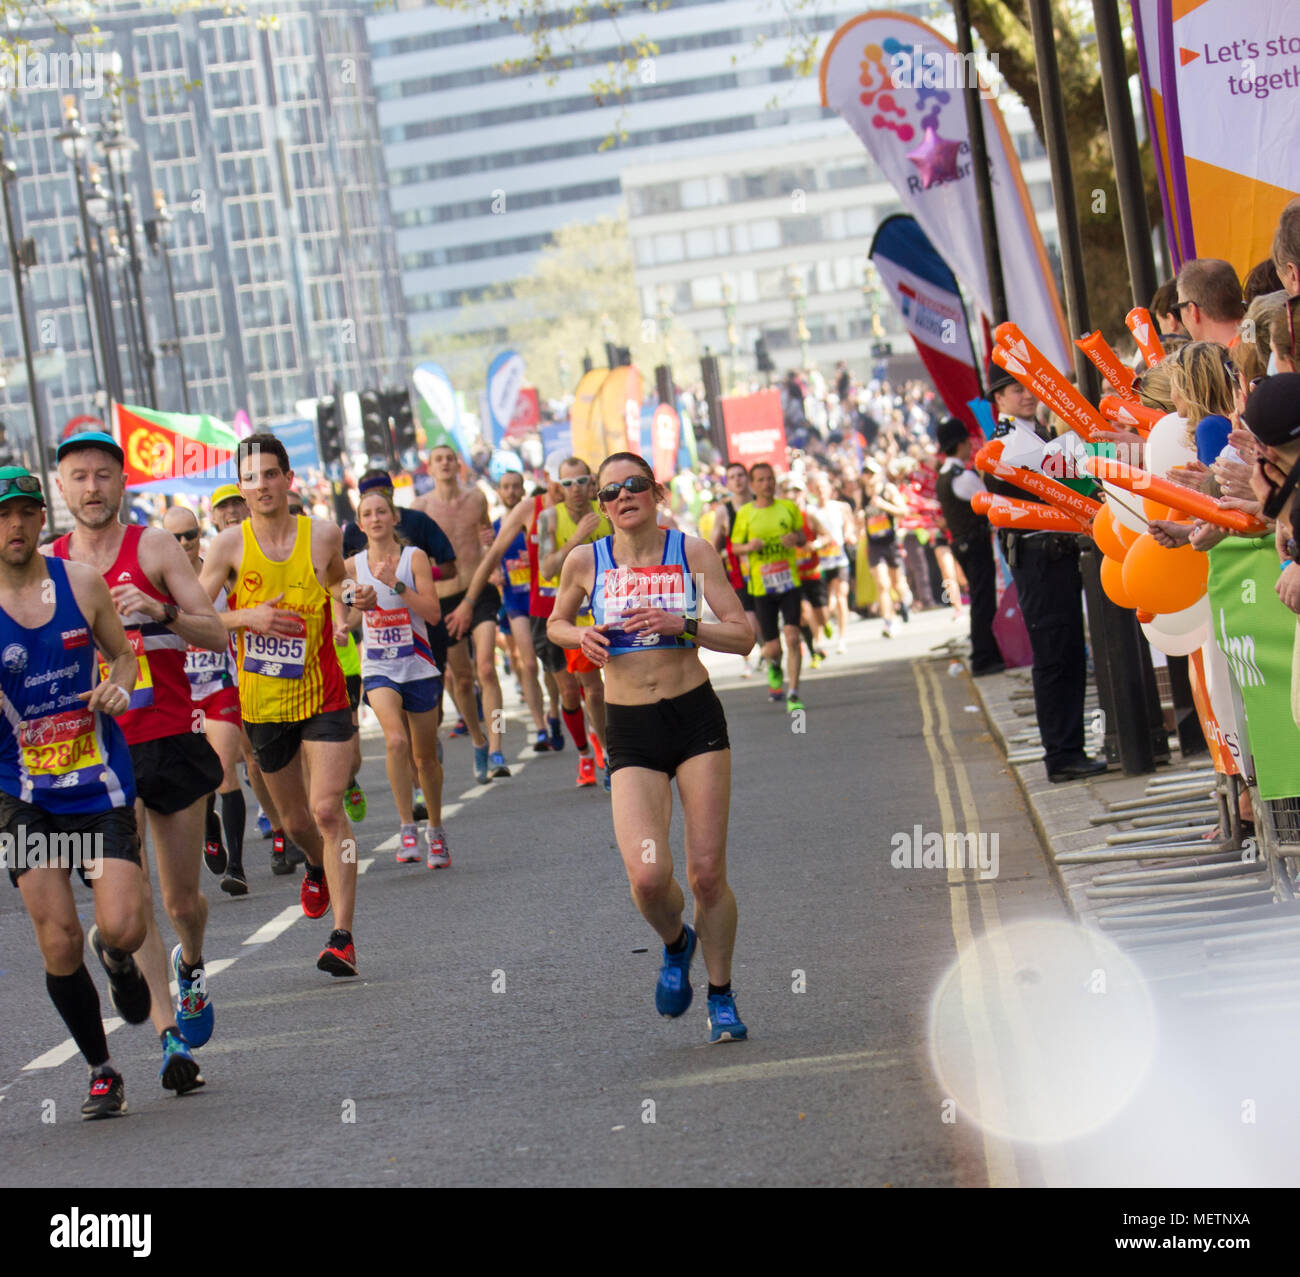 https://c8.alamy.com/comp/METNXA/st-jamess-park-birdcage-walk-londonuk-22nd-april-2018-elite-and-thousands-of-fun-runners-head-towards-buckingham-palace-in-brilliant-spring-sunshine-as-they-enter-the-final-mile-of-the-2018-virgin-london-marathon-several-of-those-taking-part-were-affected-by-the-one-of-the-hottest-marathons-days-on-record-and-needed-the-help-of-other-runners-to-complete-the-final-km-as-they-approached-the-mall-whilst-others-were-treated-by-first-aid-crews-sadly-one-runner-matt-campbell-aged-29-collapsed-after-225-miles-and-died-later-in-hospital-credit-alan-fraser-METNXA.jpg